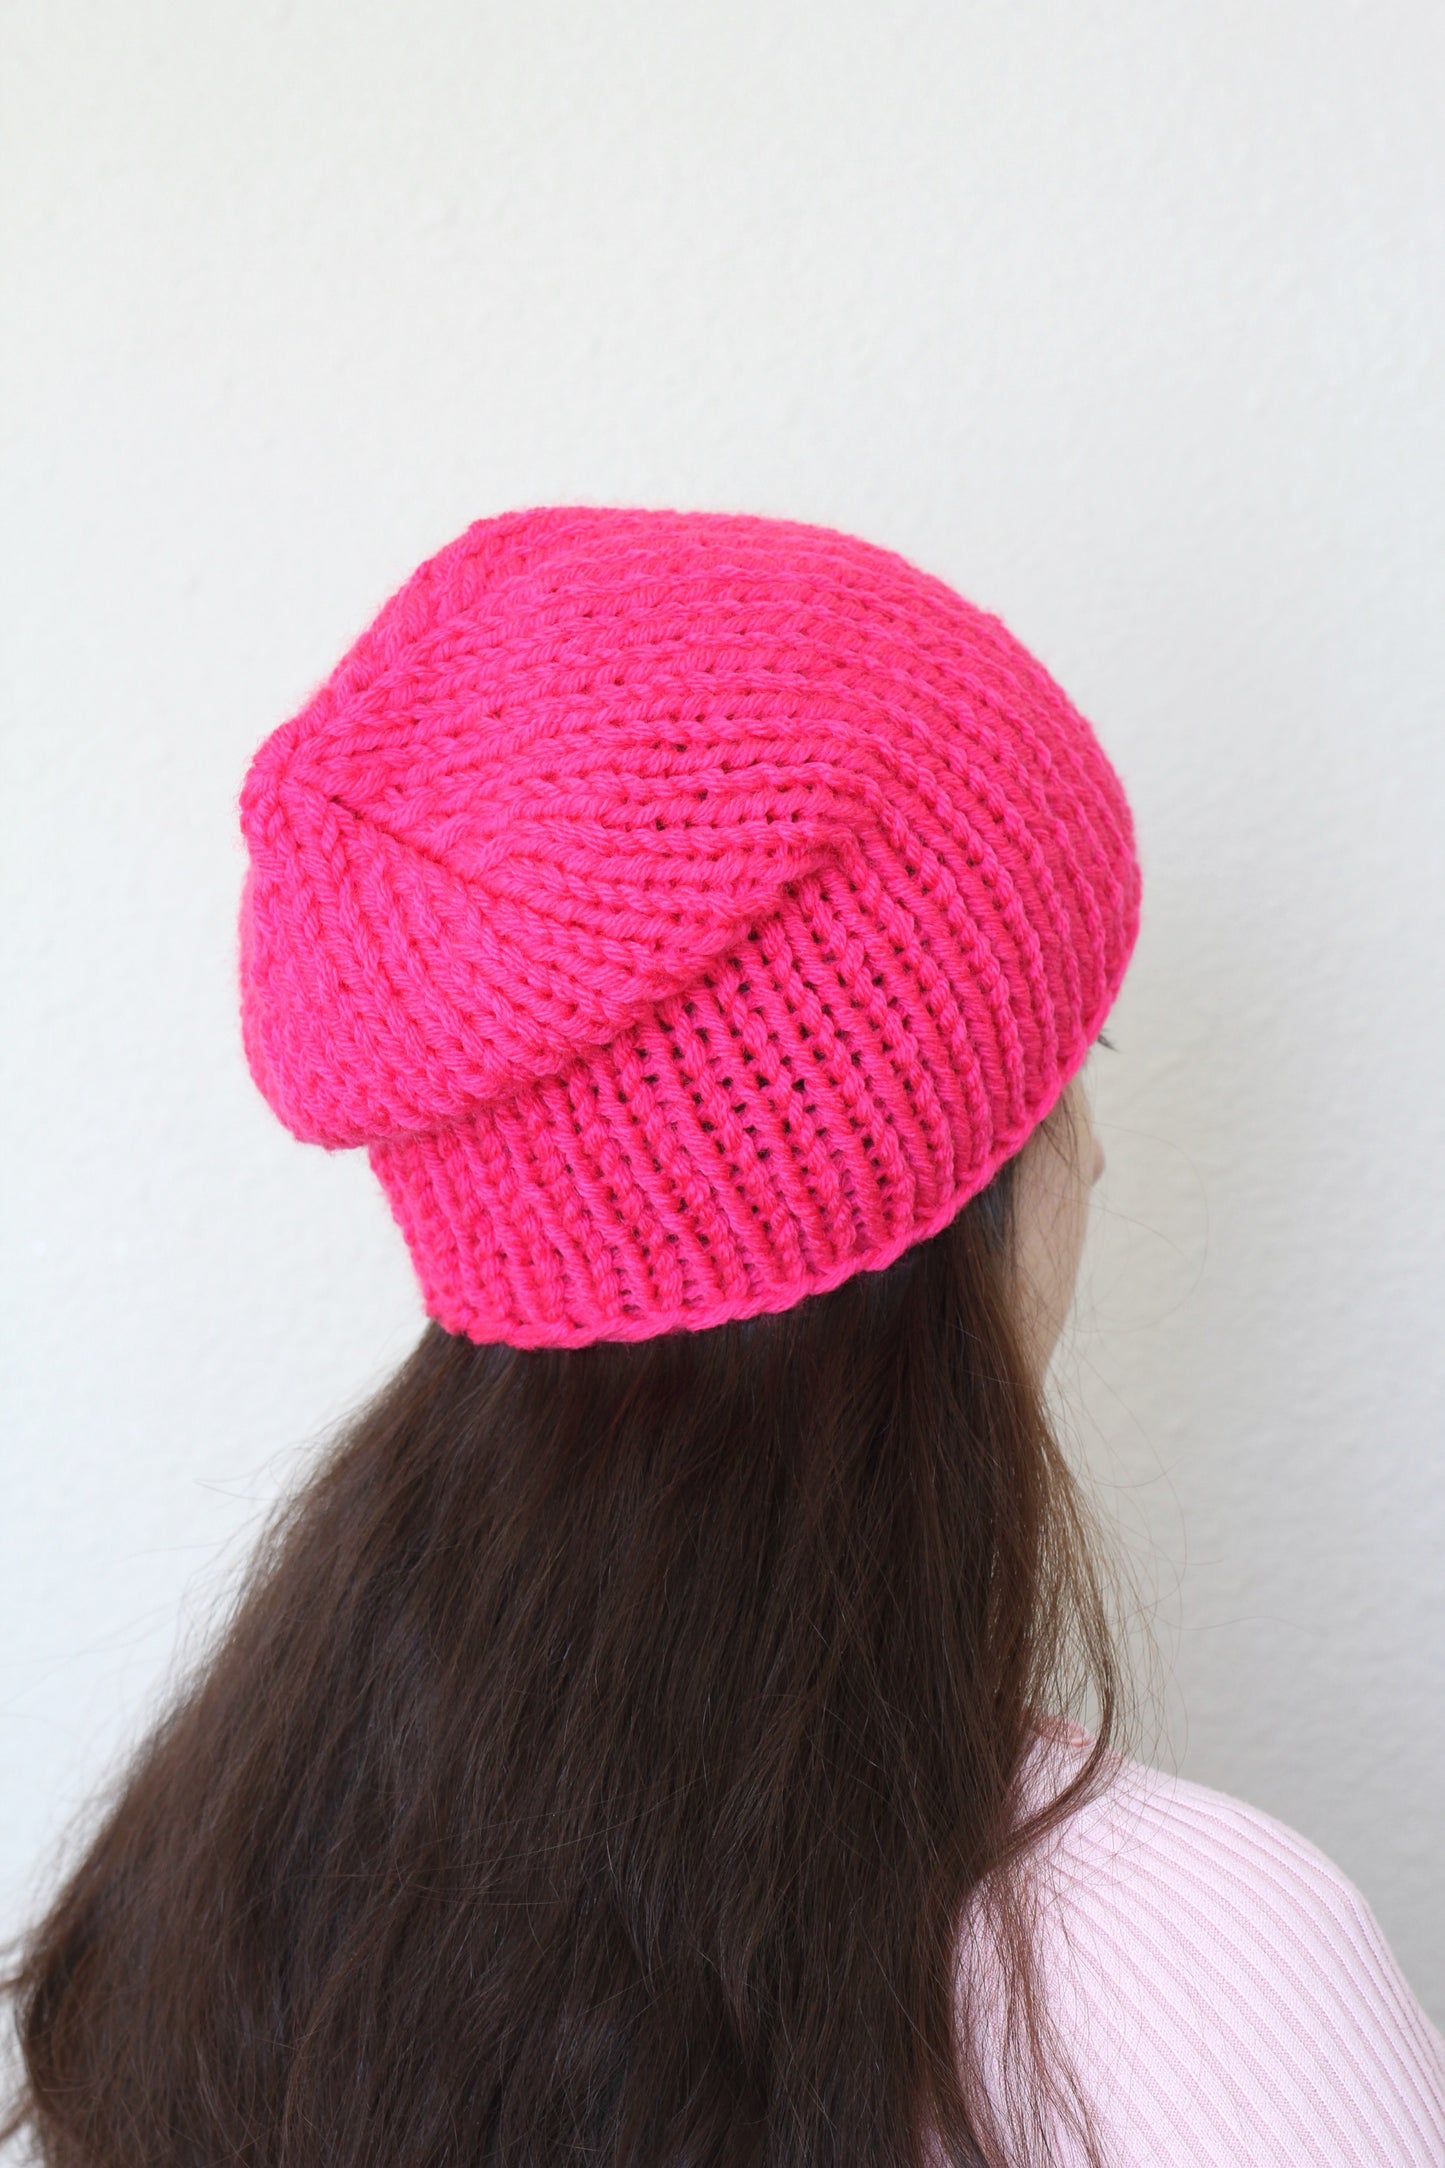 Beanie hat, knit hat, slouchy hat, knit beanie in rust orange color